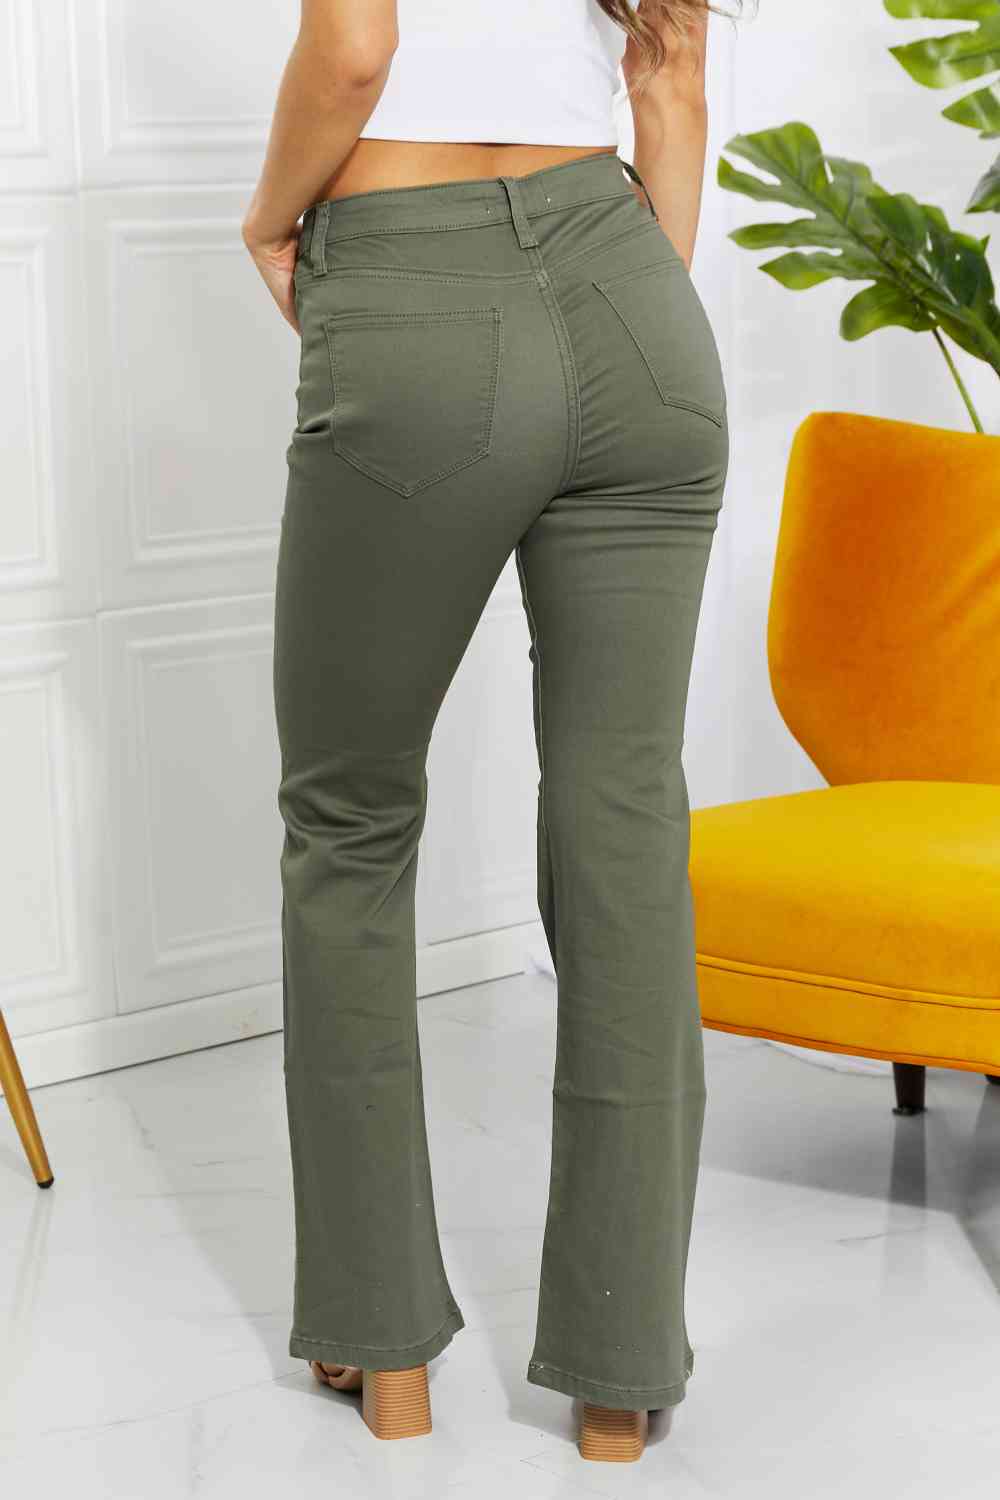 Zenana Clementine Full Size High-Rise Bootcut Jeans in Olive - Bellisima Clothing Collective